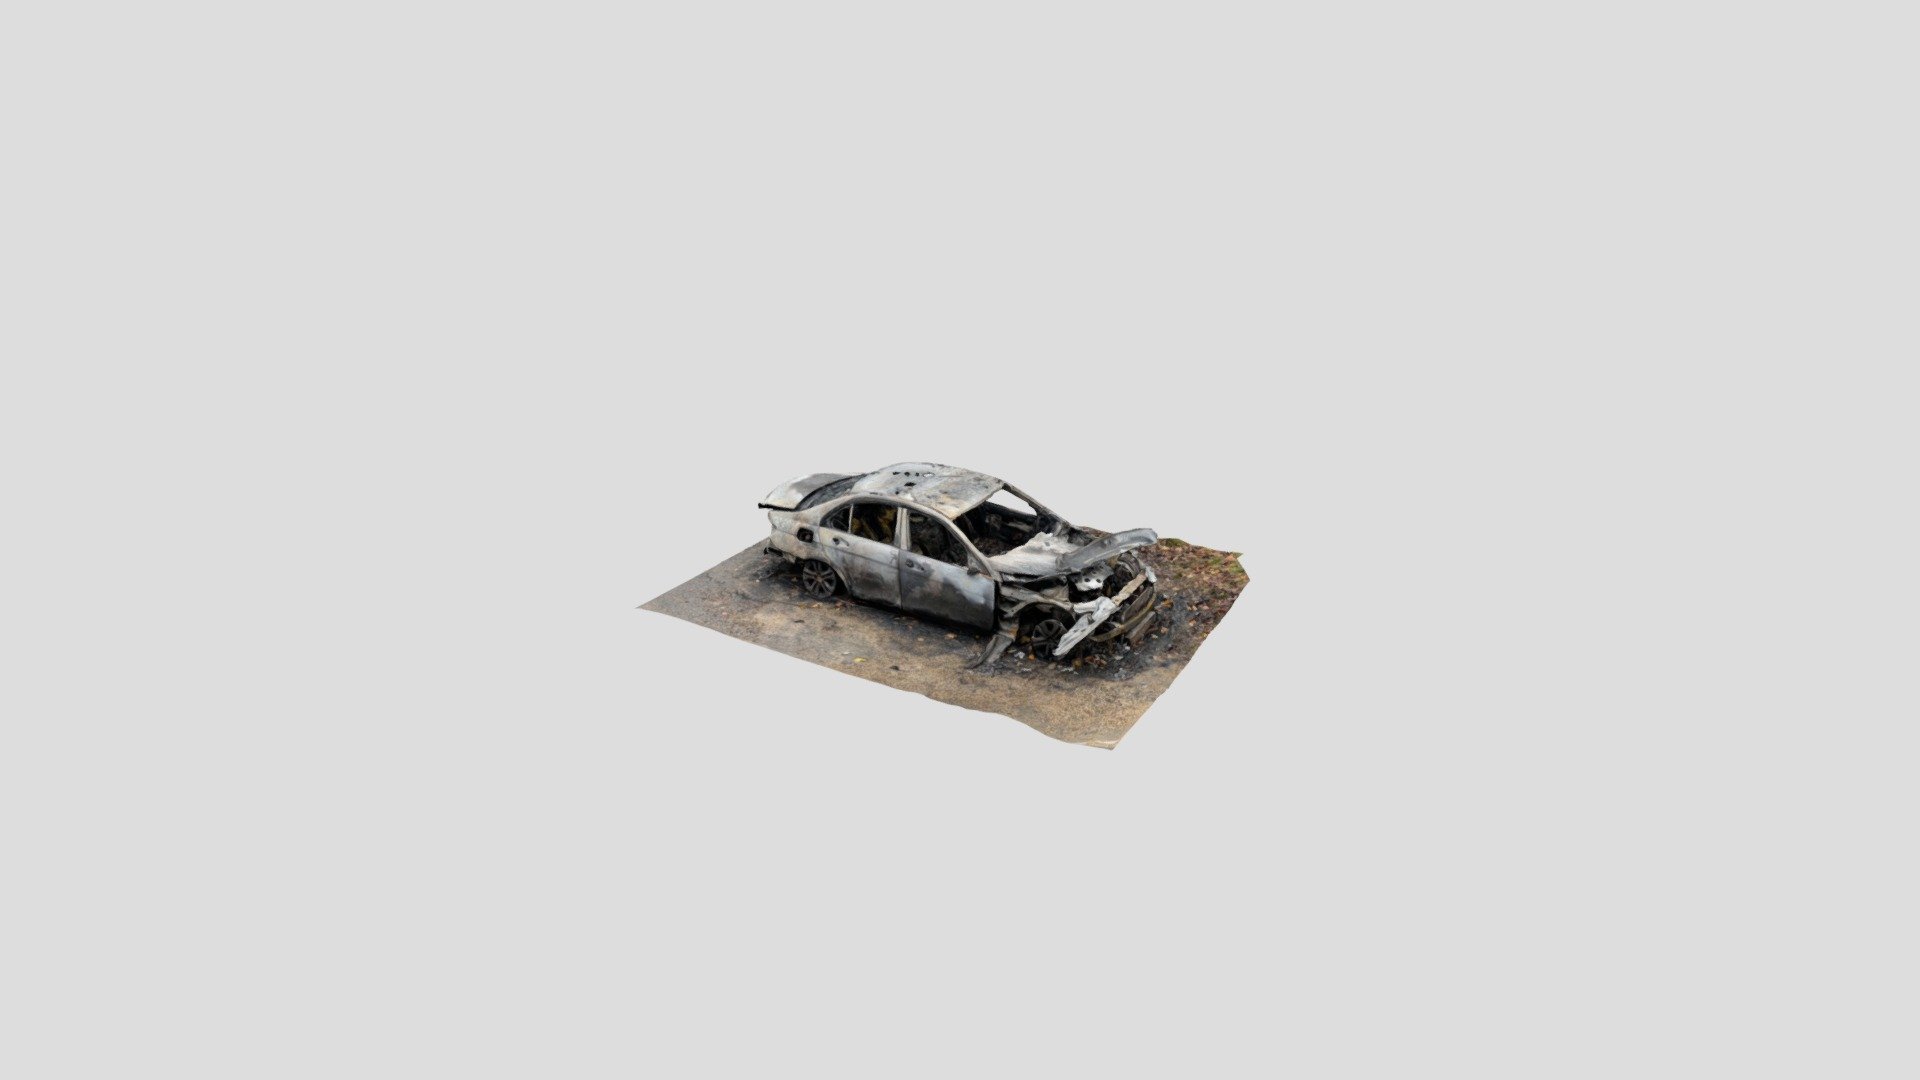 Burnt down car left on the side of the road - Burnt down car wreck - Mercedes - 3D model by bluebuttercup 3d model